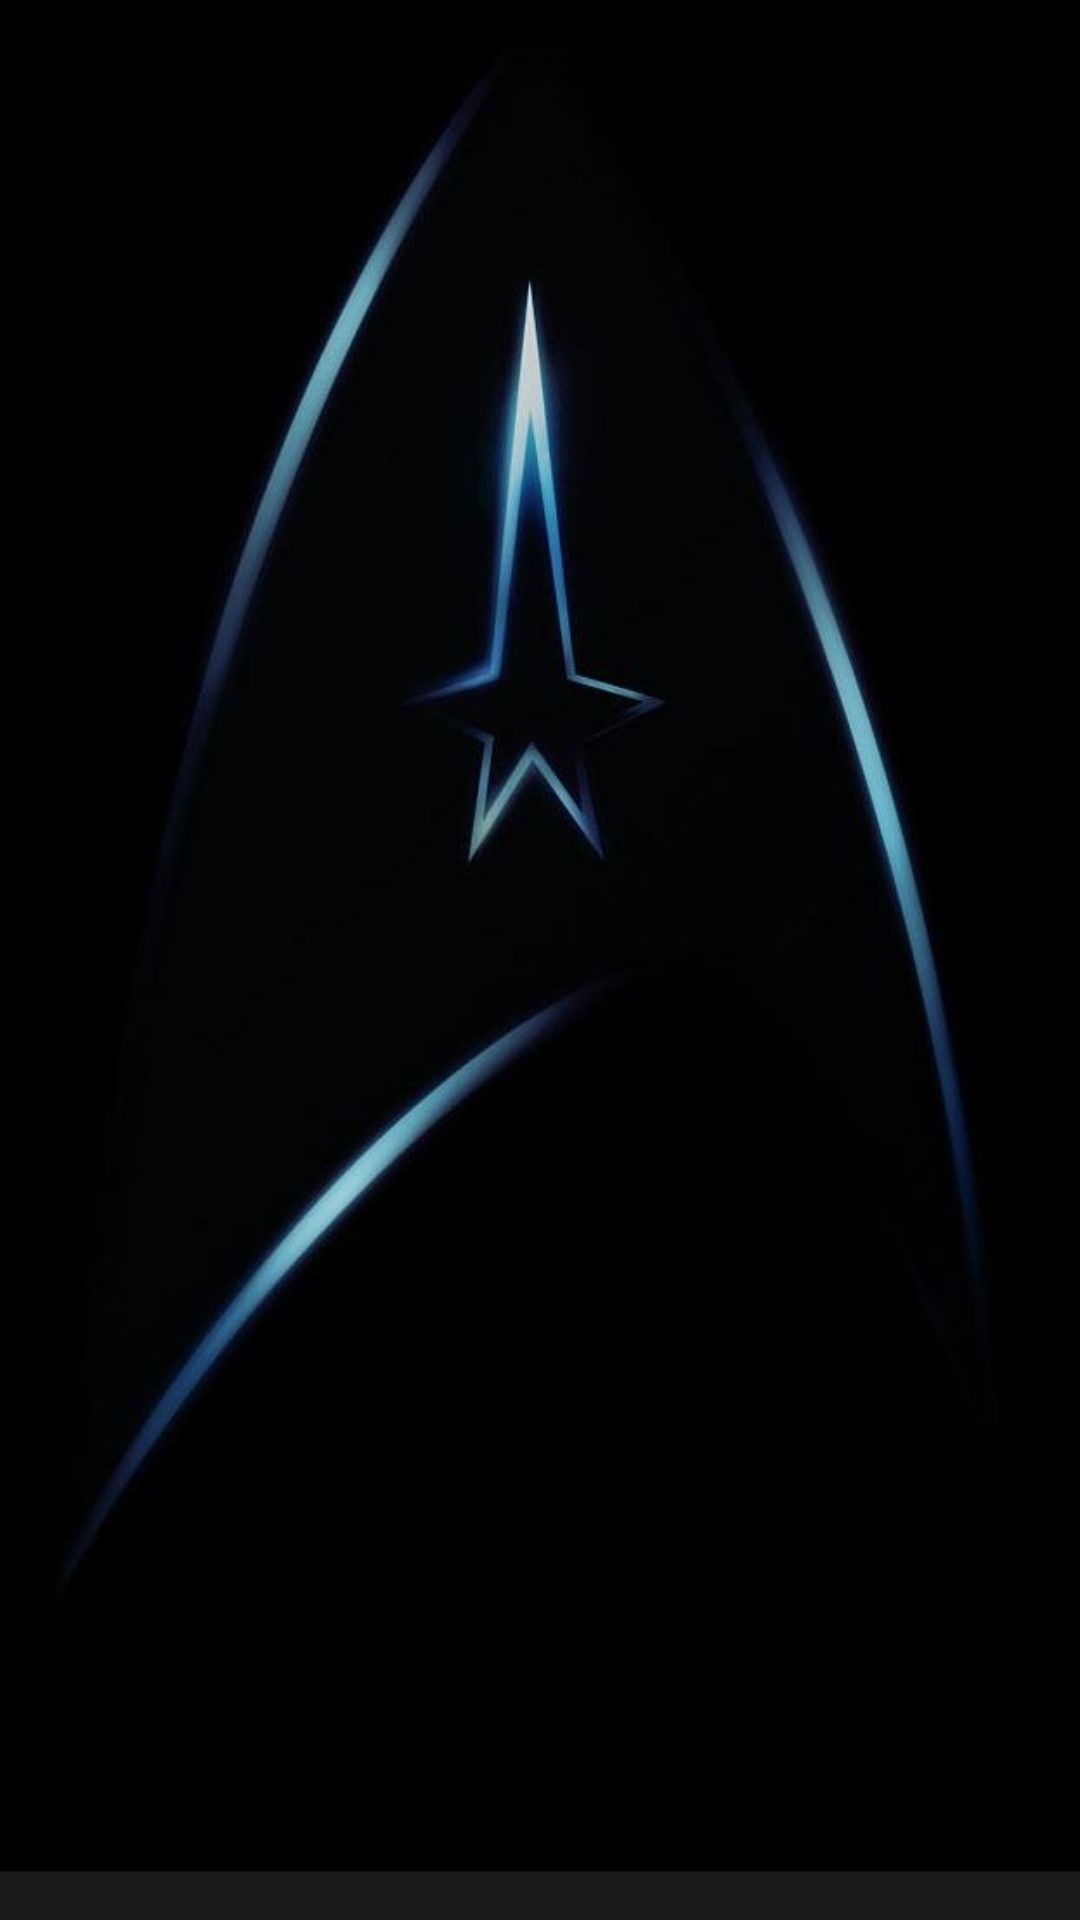 Star Trek iPhone 8 Wallpaper with high-resolution 1080x1920 pixel. You can use this wallpaper for your iPhone 5, 6, 7, 8, X, XS, XR backgrounds, Mobile Screensaver, or iPad Lock Screen - Star Trek